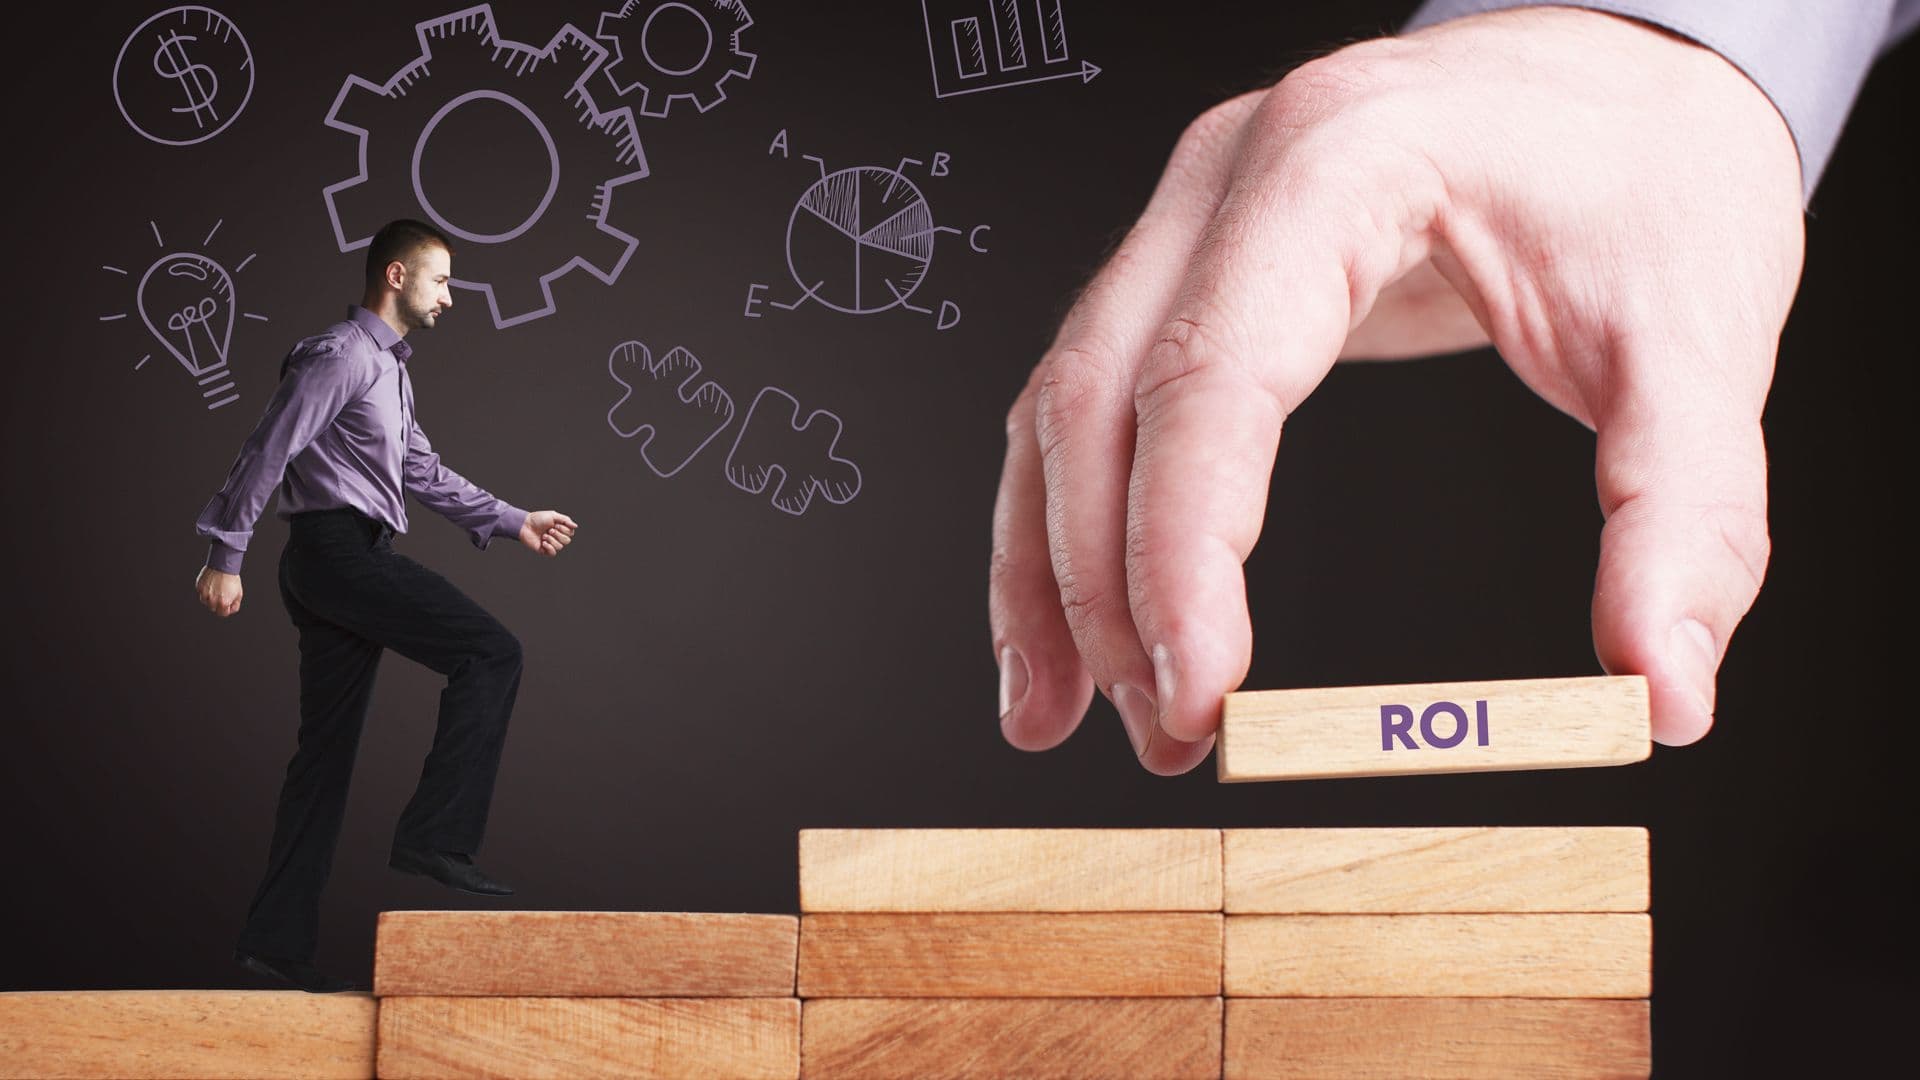 Part 3: The Best Way to Maximize ROI for Continuous Improvement